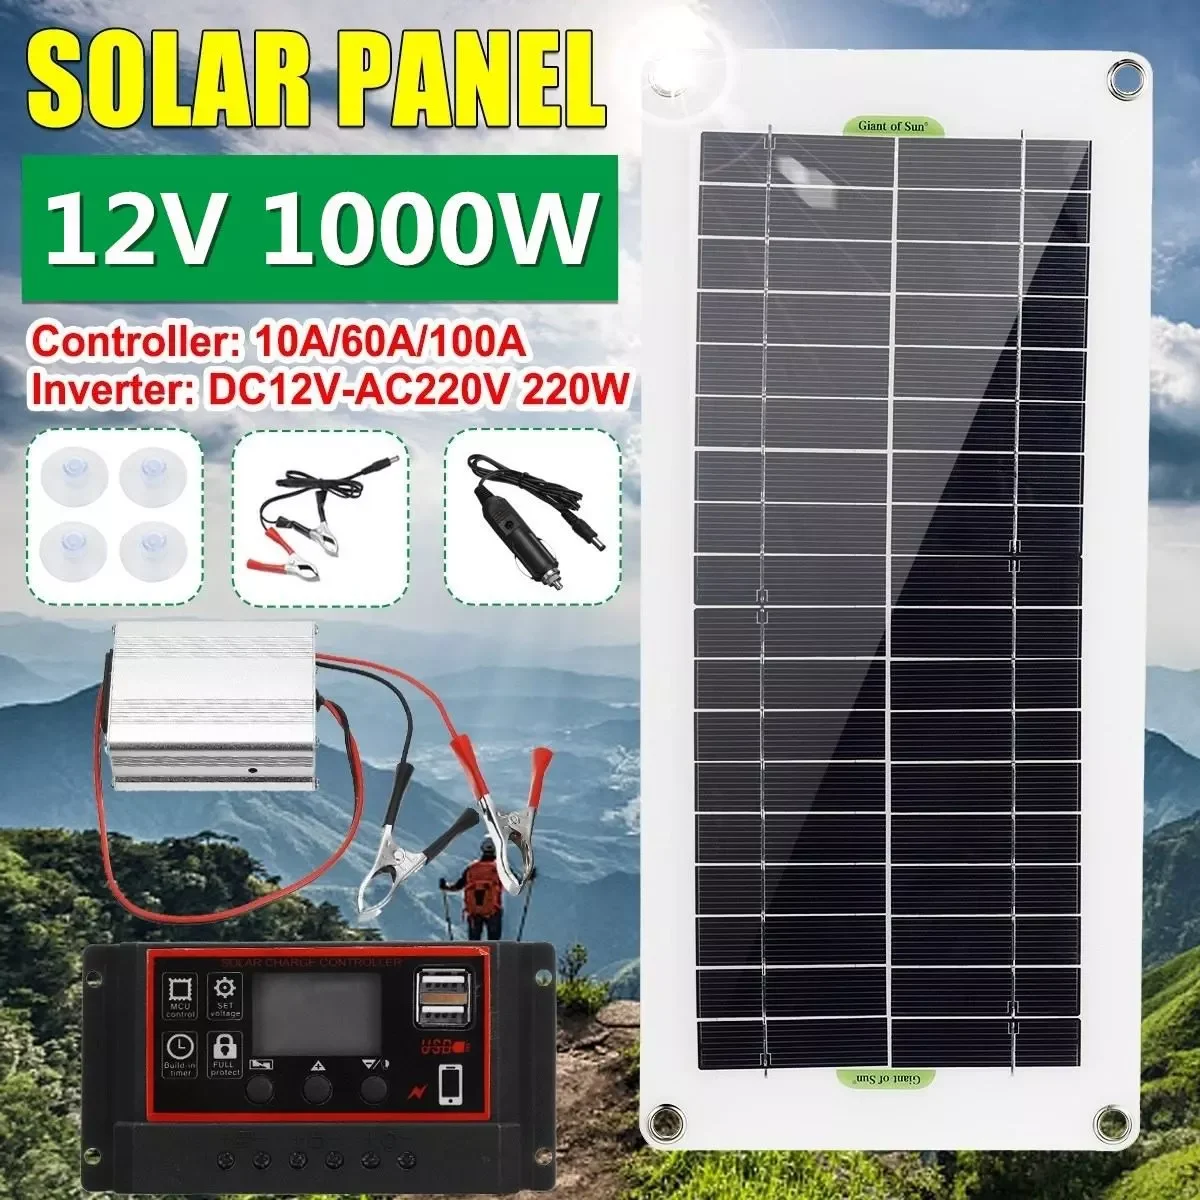 

1000W Solar Power Inverter Solar Panel Dual USB Solar Panel Kit Outdoor Battery Supply Charger+Controller+Inverter 10A/60A/100A